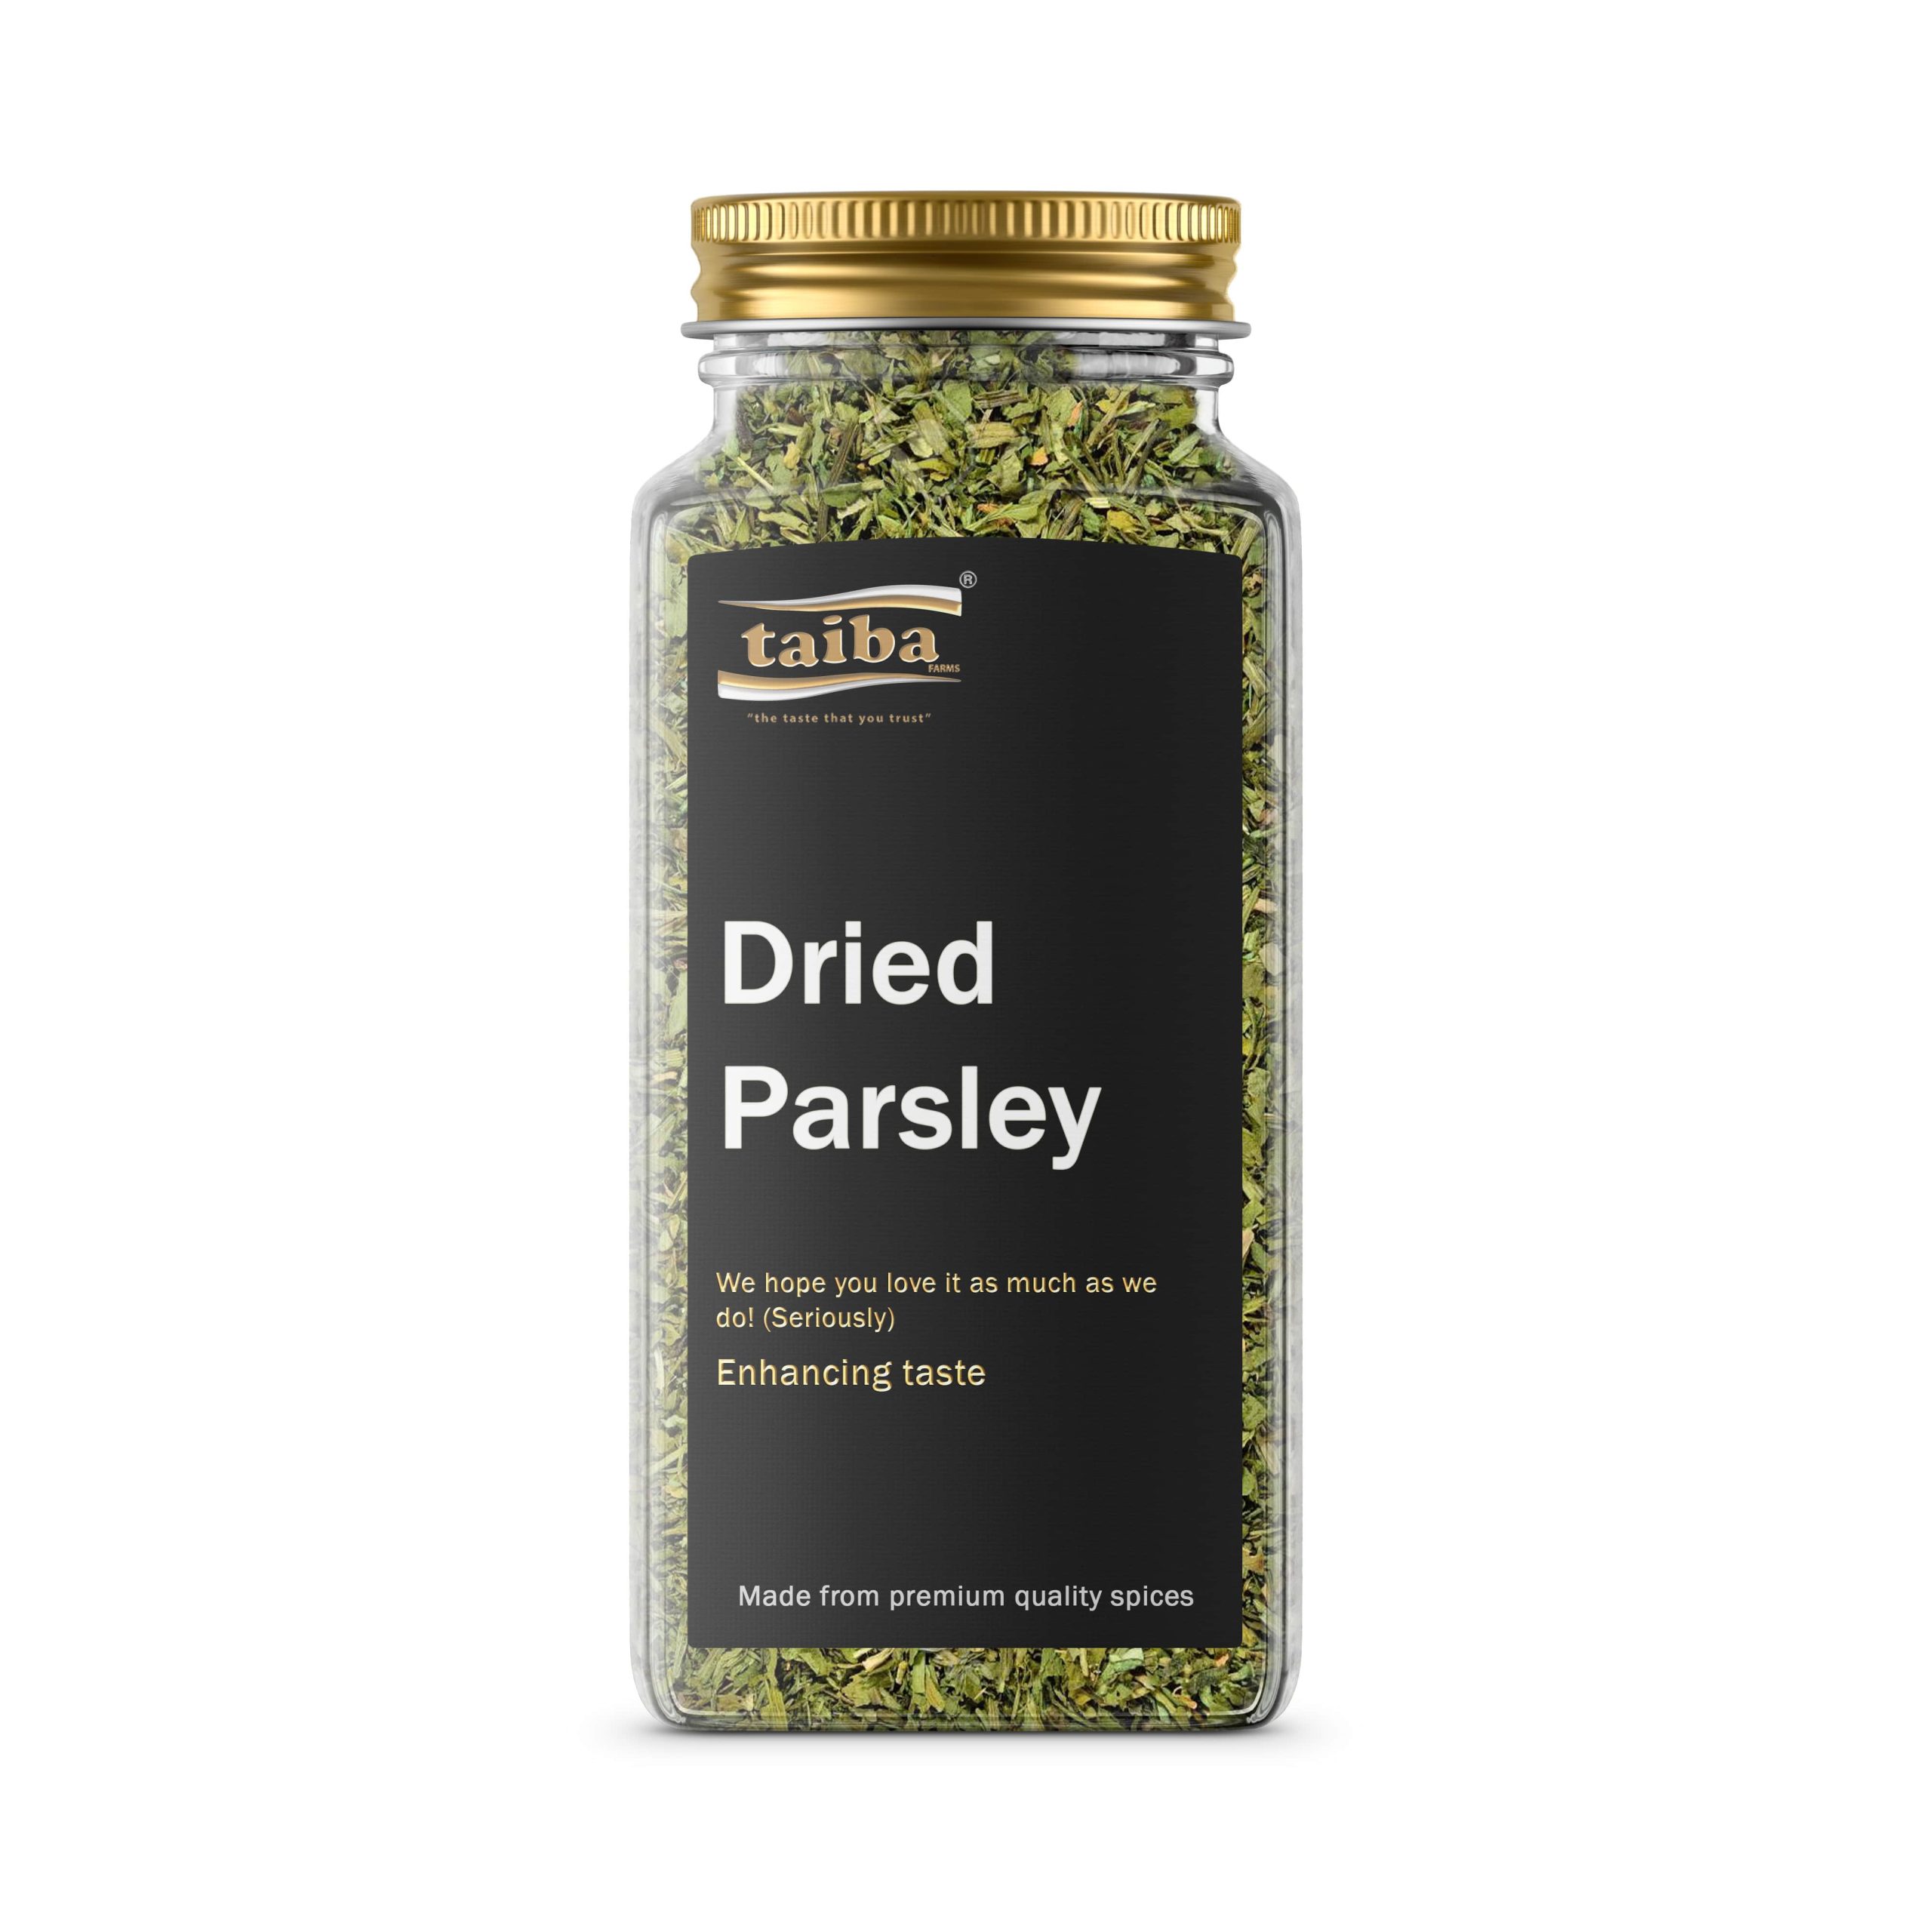 parsley-online-grocery-hearps-and-spices-online-export-and-import-companies-suppliers-and-wholesale-in-UAE-Saudi-Arabia-Qatar-Oman